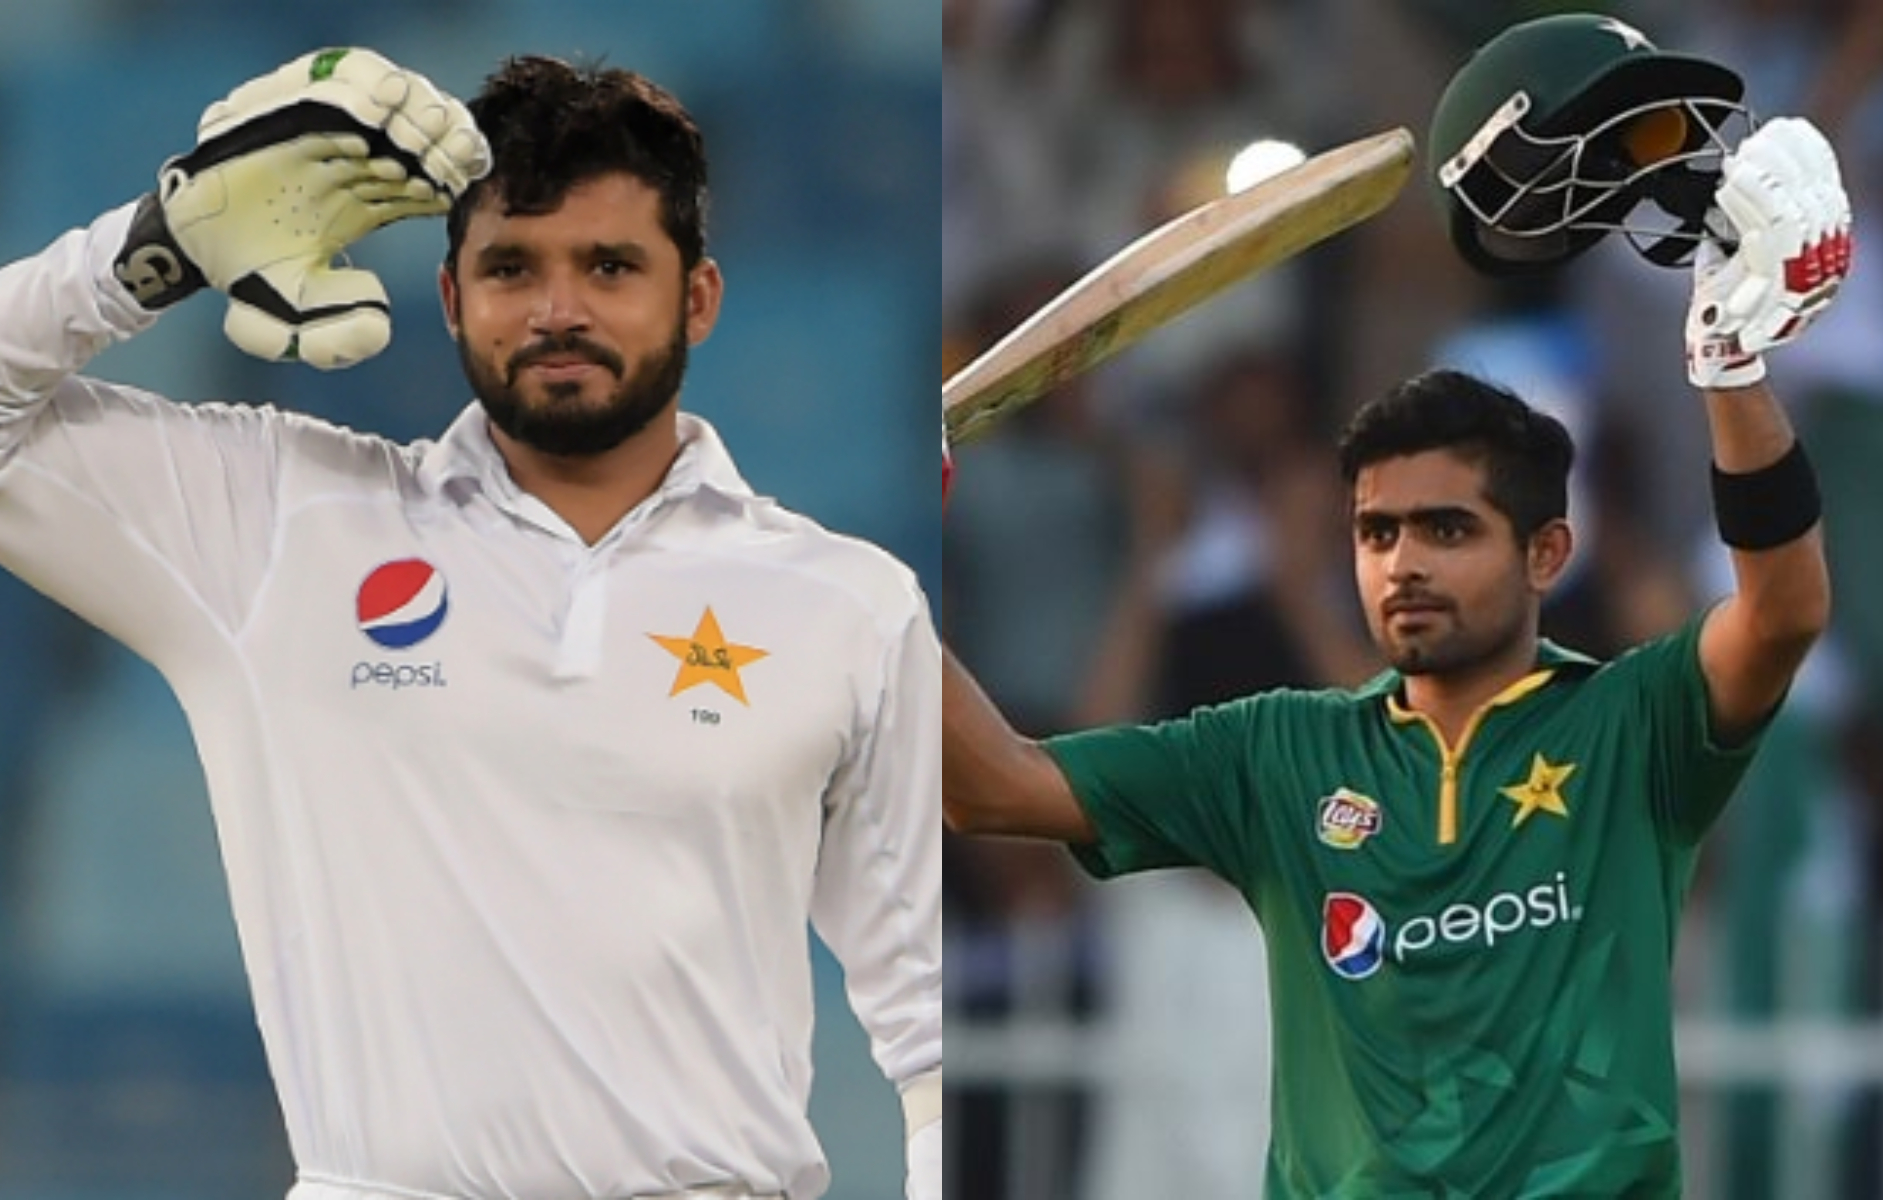 Azhar Ali will captain in Tests, while Babar Azam will lead in T20Is